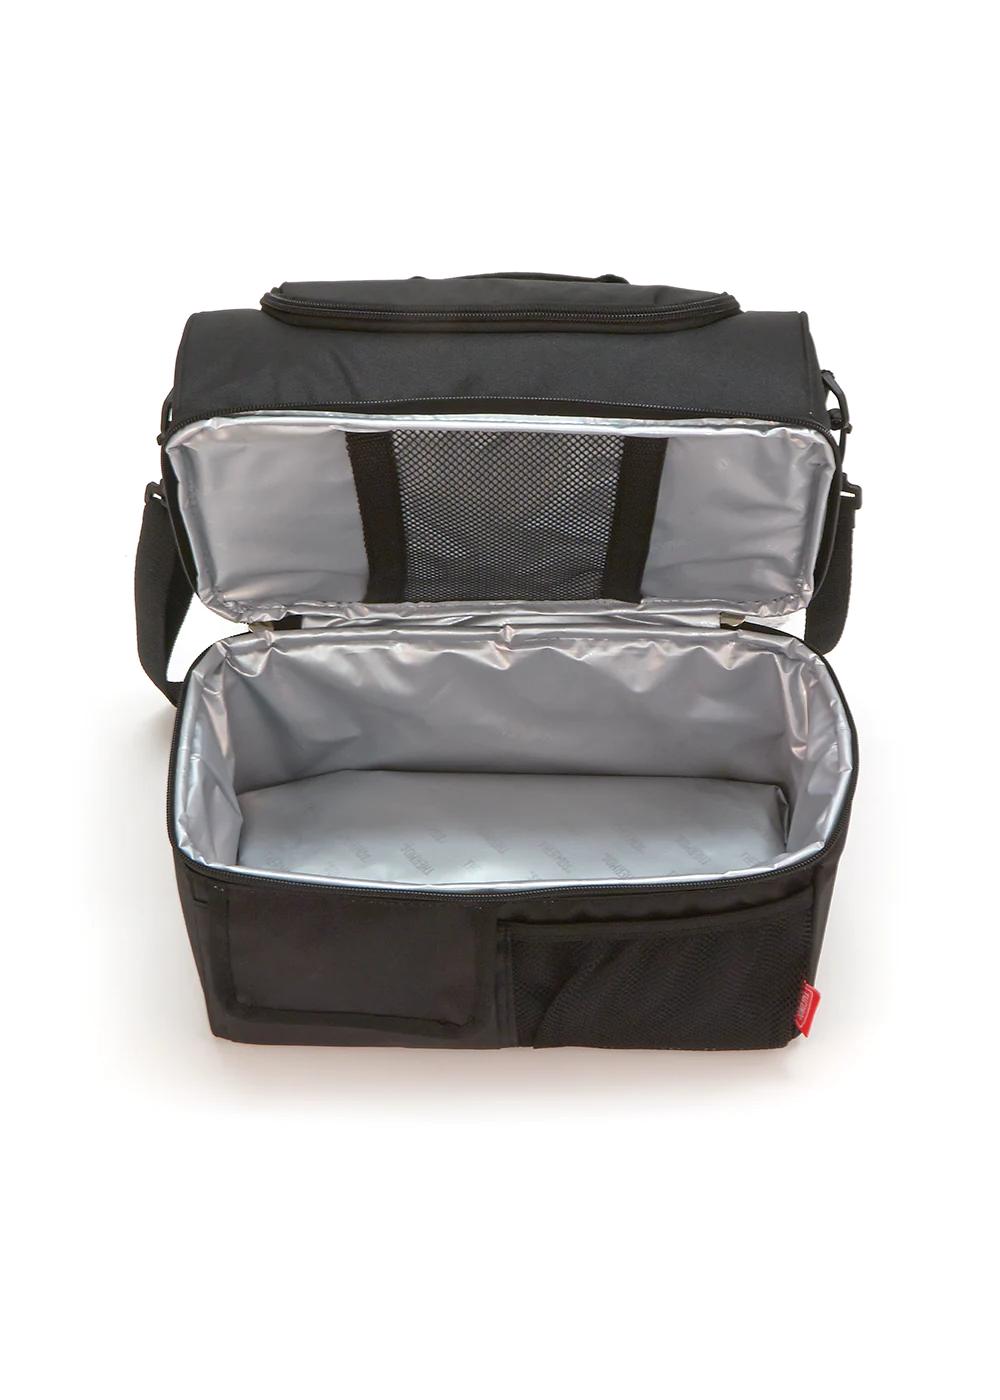 Thermos Insulated Lunch Lugger - Black; image 2 of 4